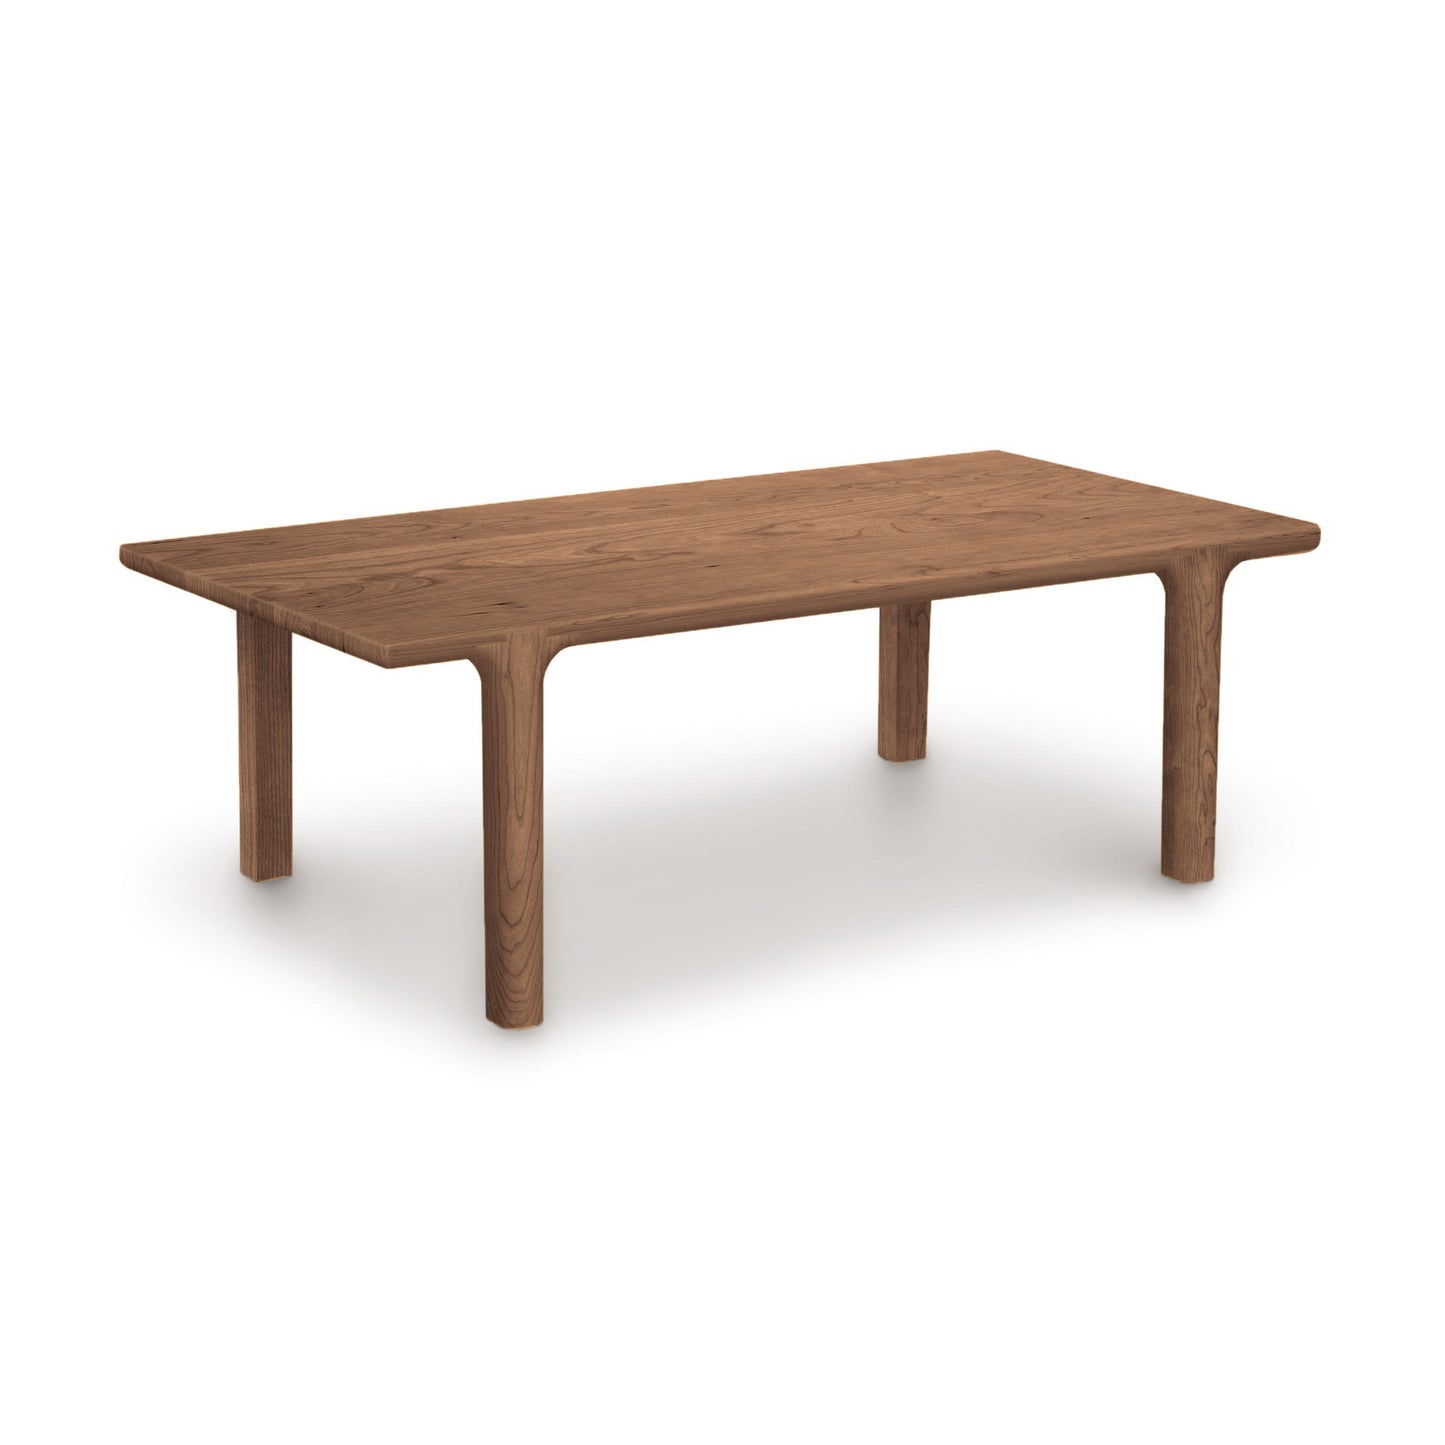 The Copeland Furniture Sierra Rectangular Coffee Table, featuring a contemporary design, showcases a beautiful wooden tabletop supported by two elegant legs. This exquisite piece stands out on a clean white background.